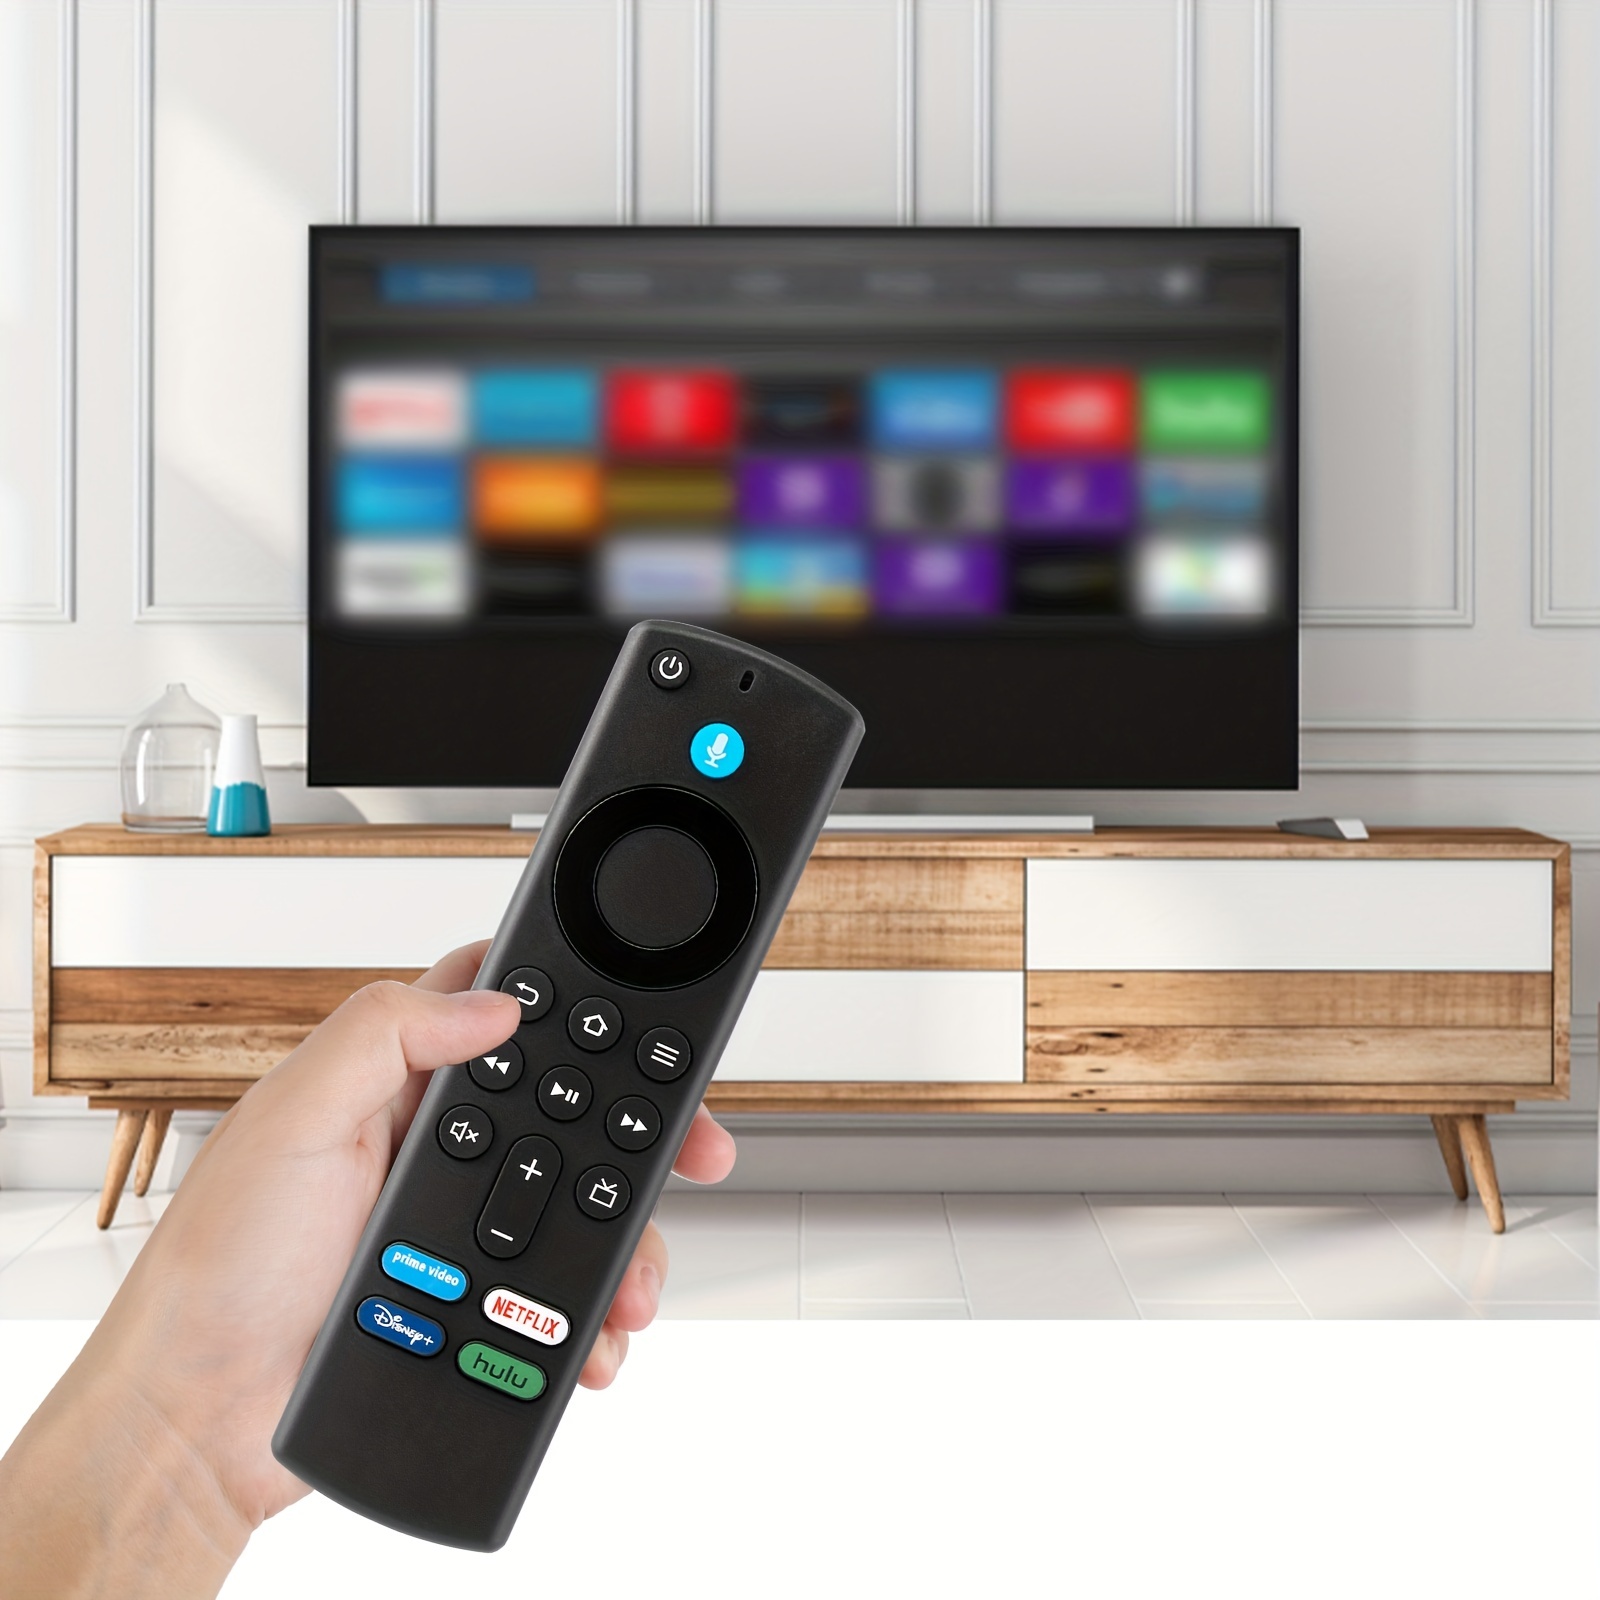 Voice Remote Control For Fire TV 4-Series Smart TV (Alexa)- Enhance Your TV  Experience With Alexa!